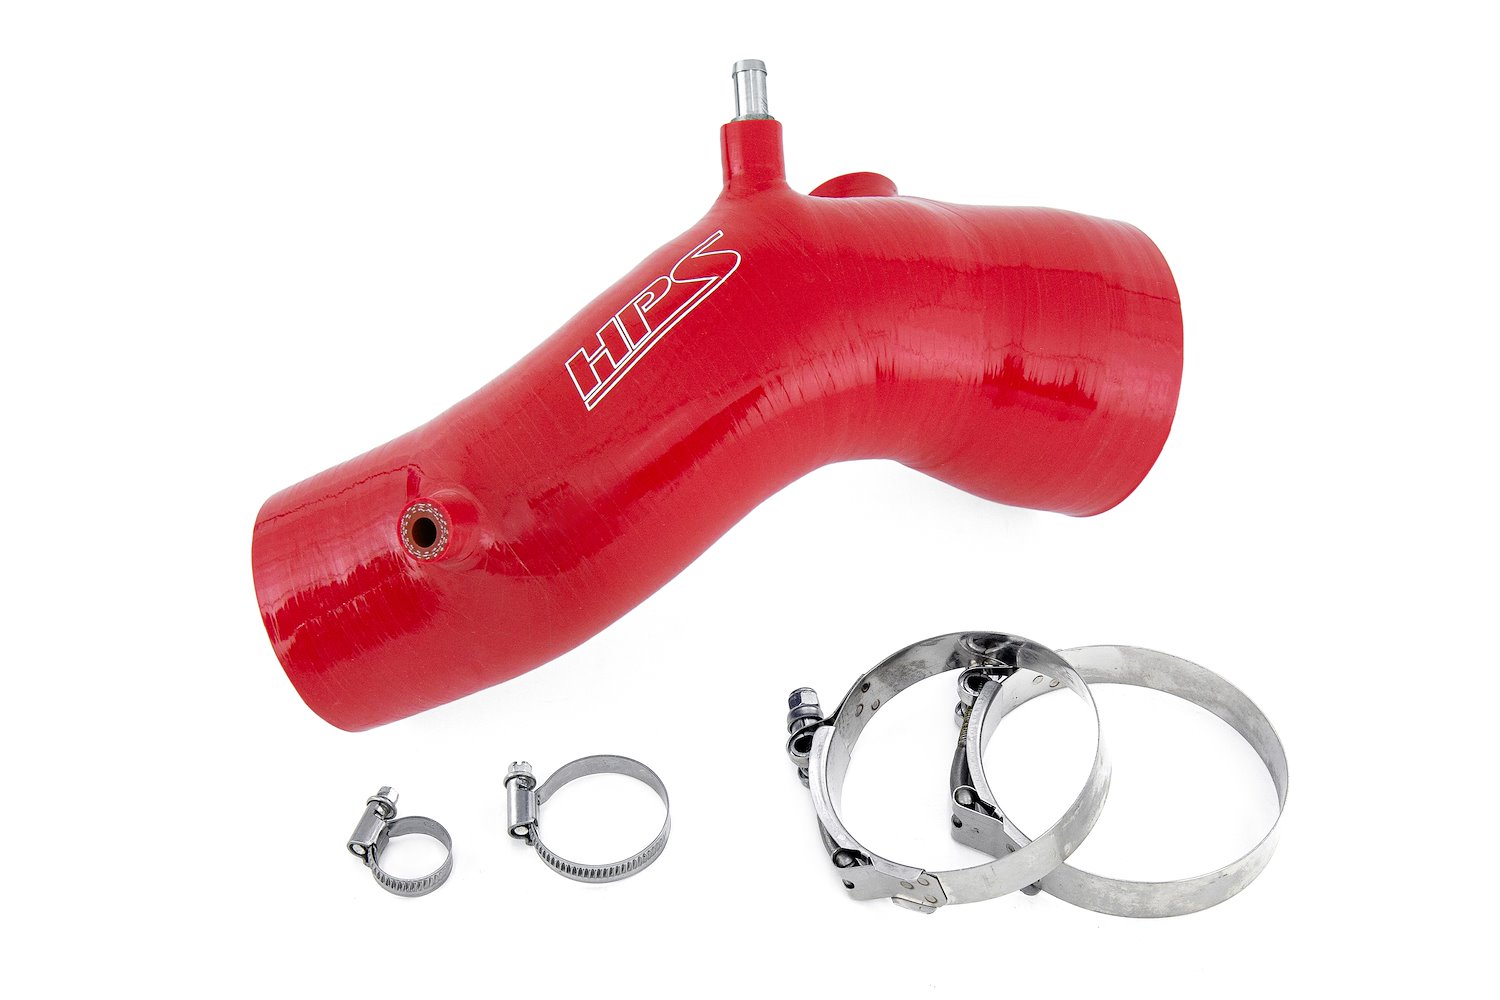 57-1844-RED Silicone Air Intake Kit, Replaces Stock Restrictive Air Intake, Improve Throttle Response, No Heat Soak